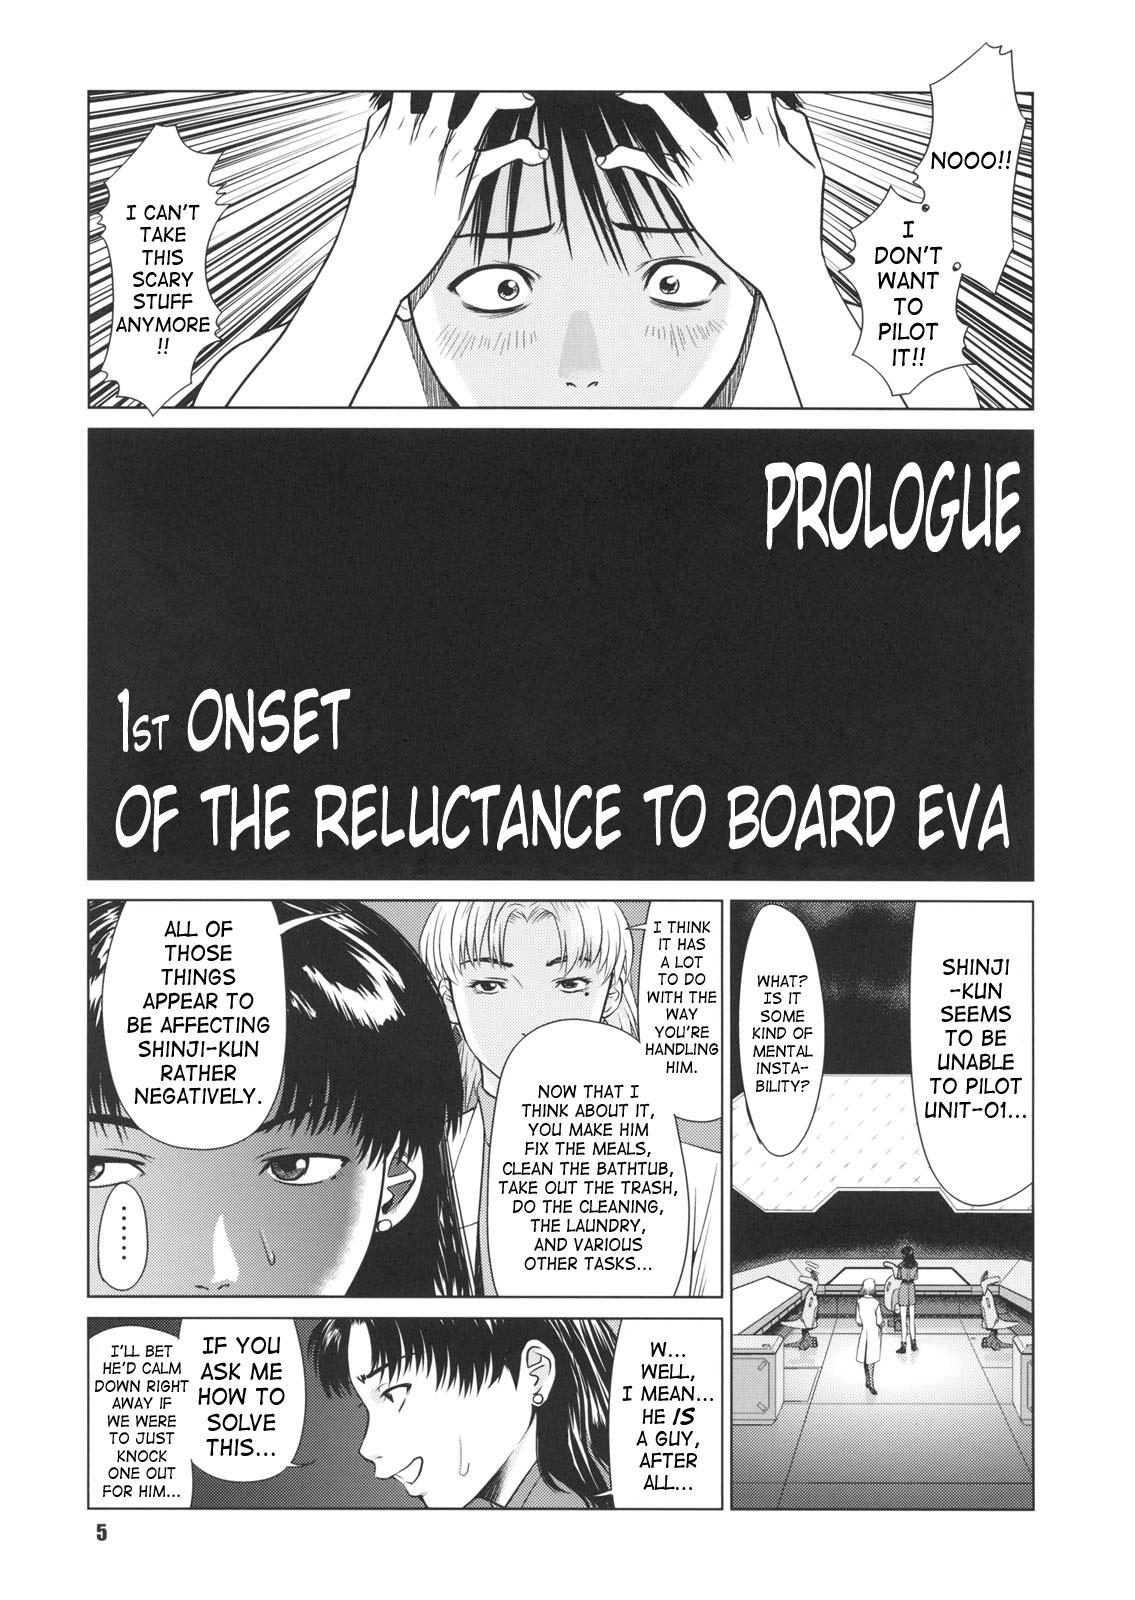 Naturaltits Ayanami no Okage | Thanks to Ayanami... - Neon genesis evangelion Full - Page 4